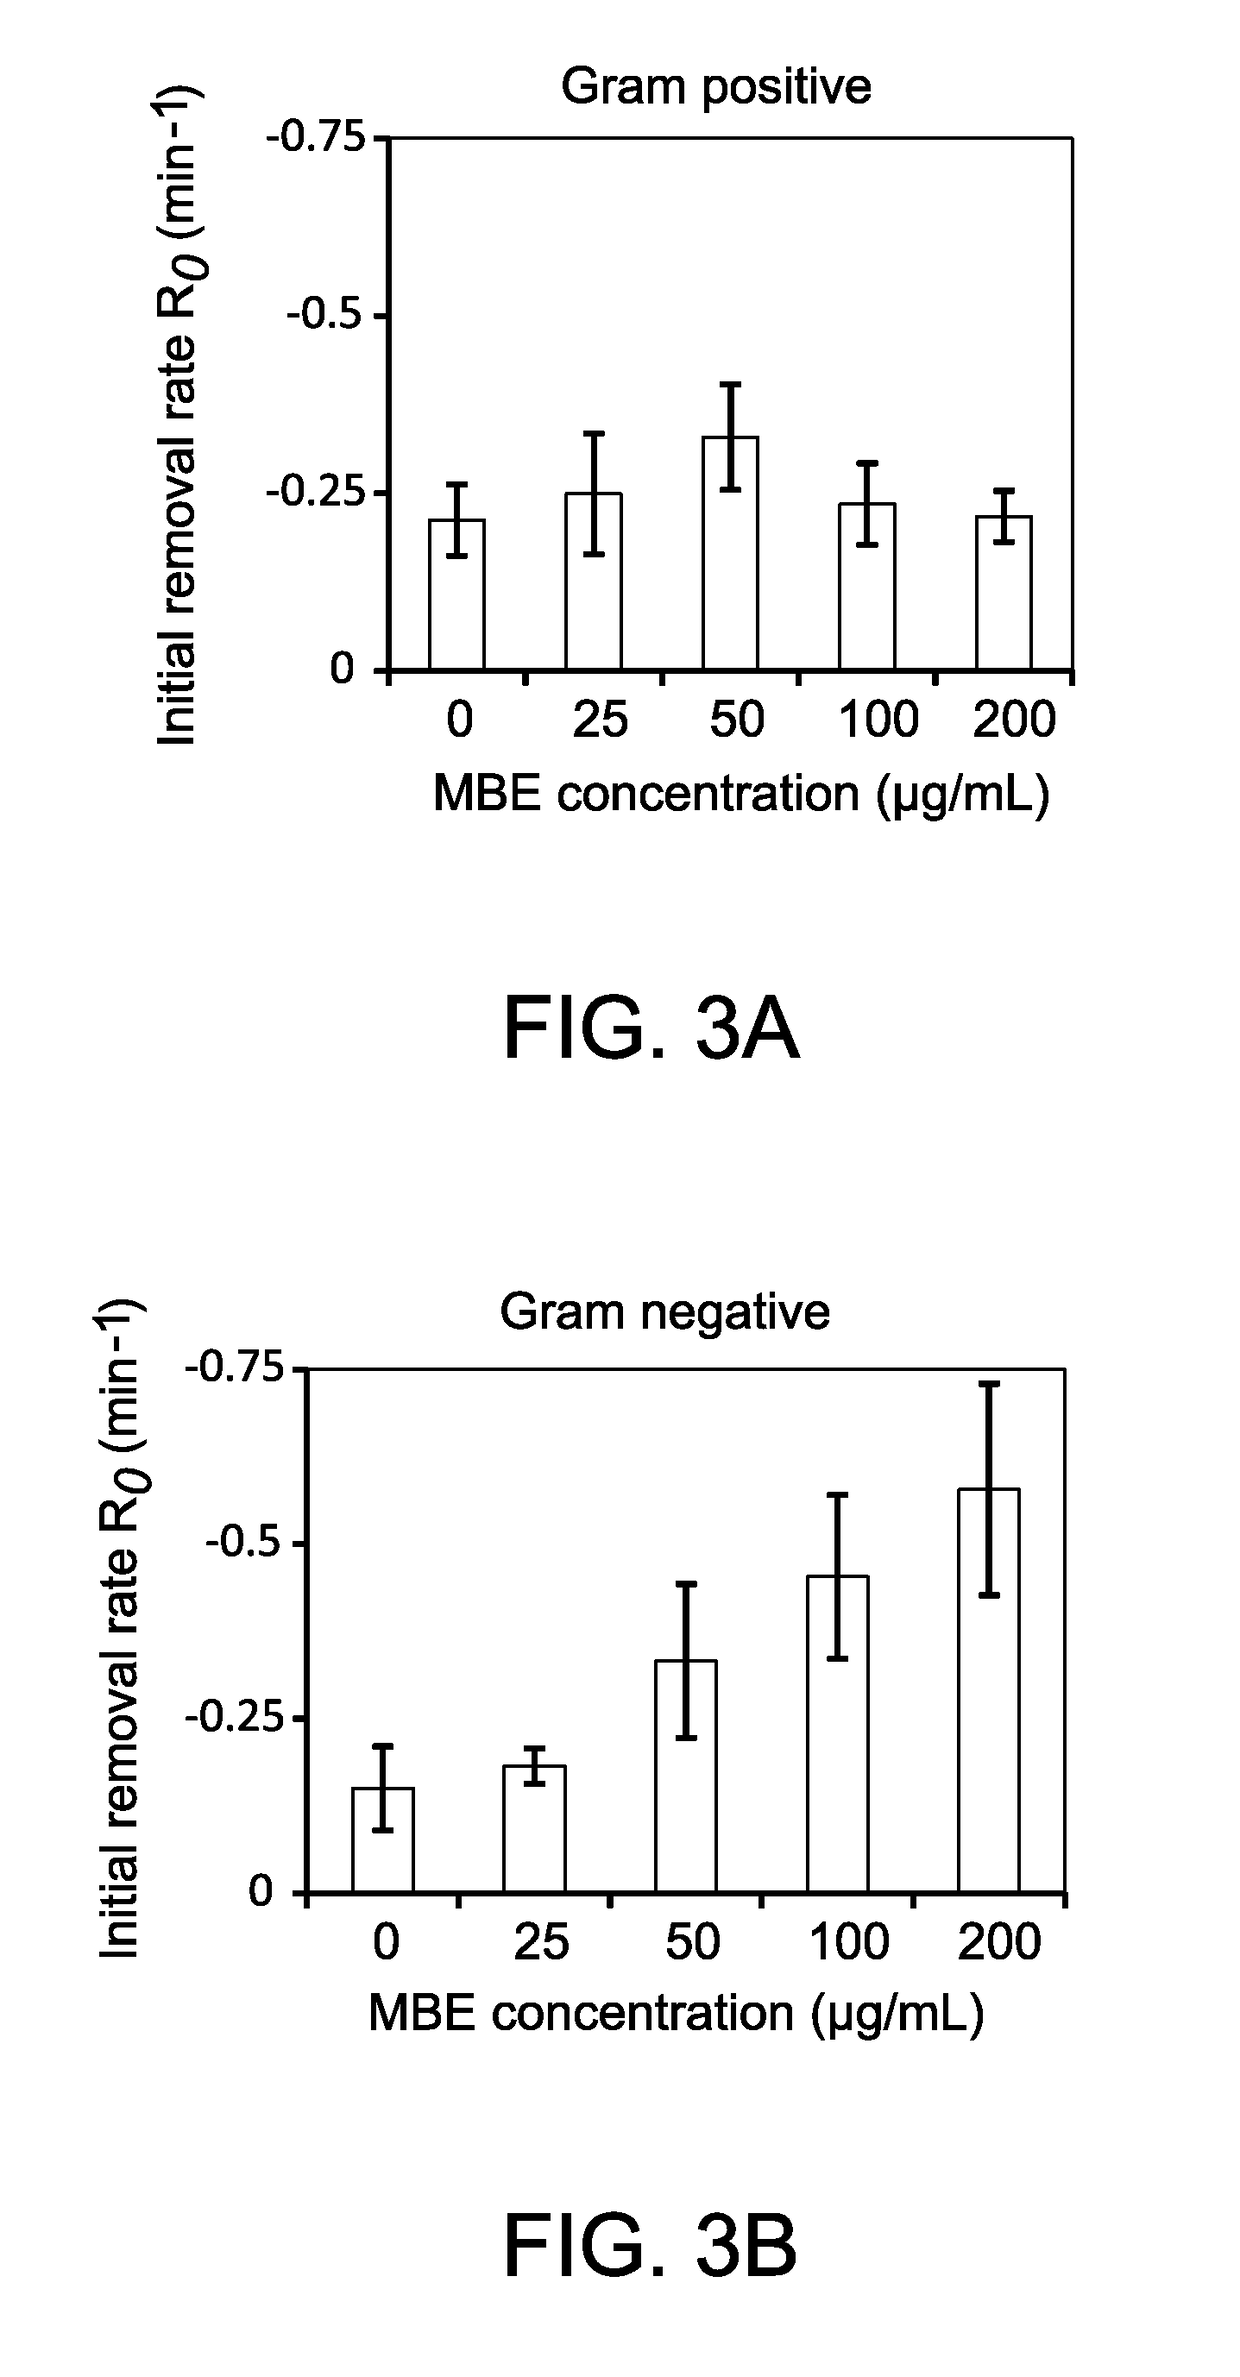 Magnolia bark extract as a hydrophobic ligand for preferential removal of gram negative bacteria from the oral cavity